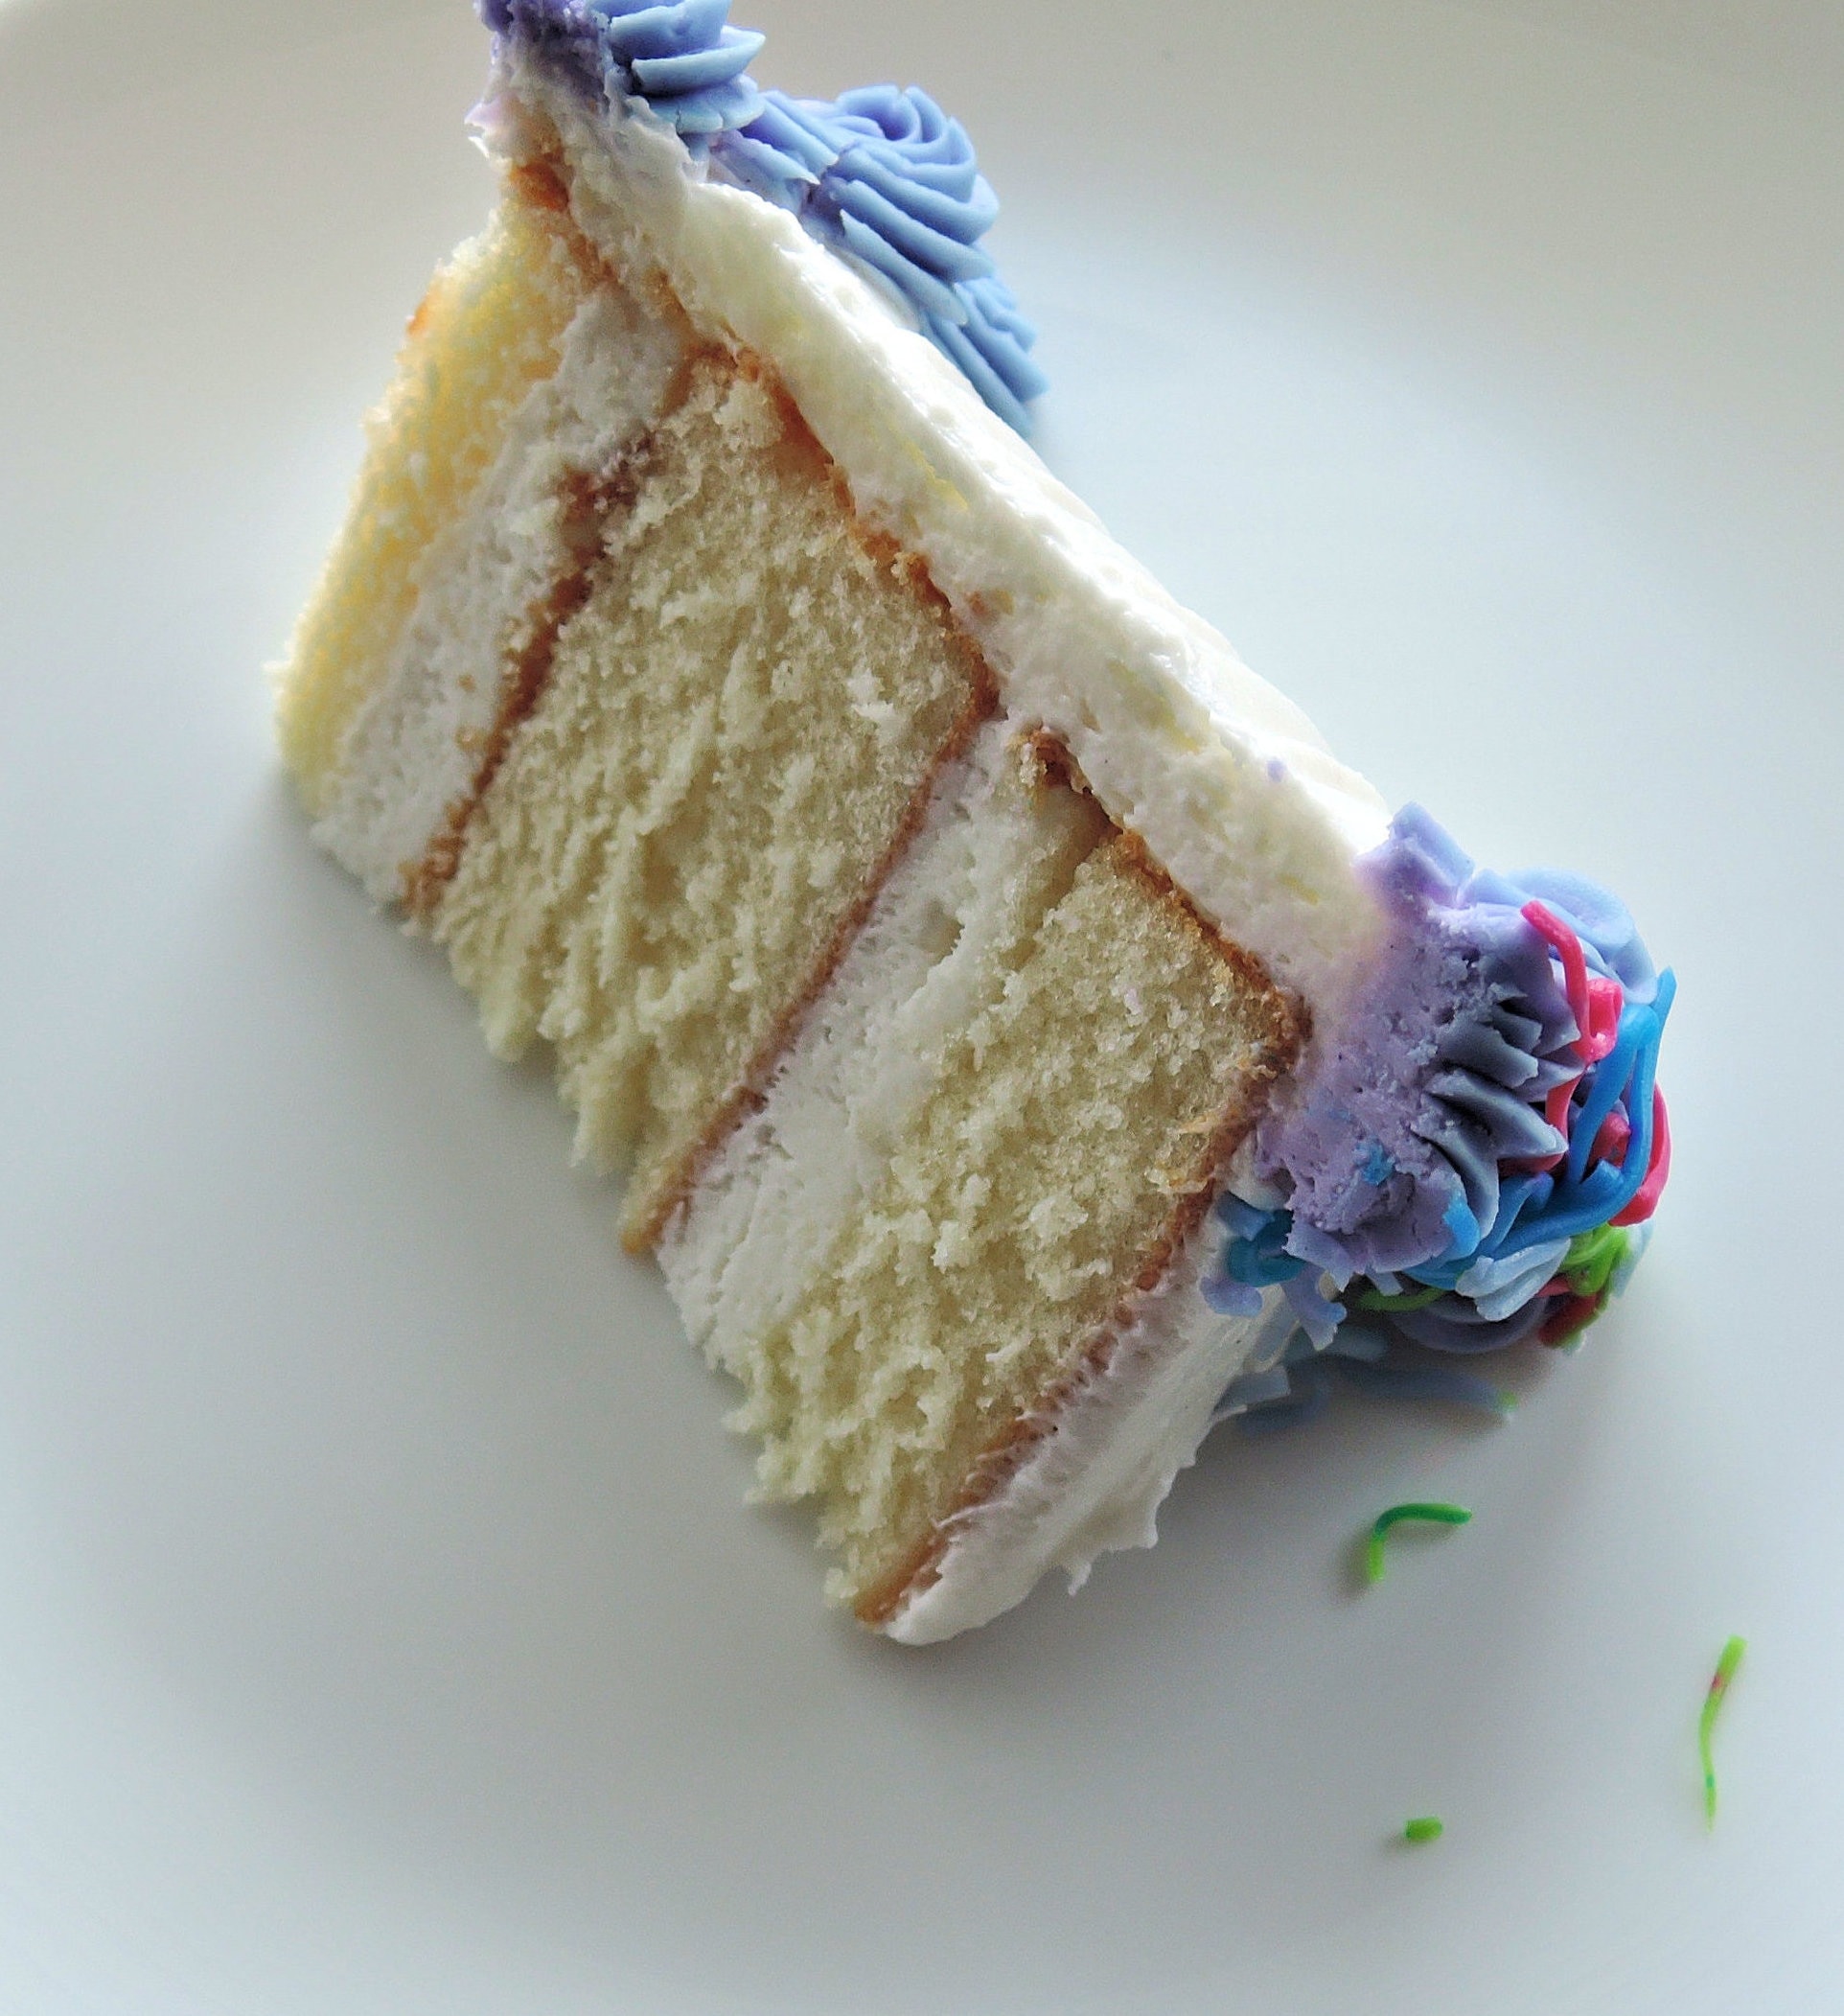 sliced icing cake on white surface